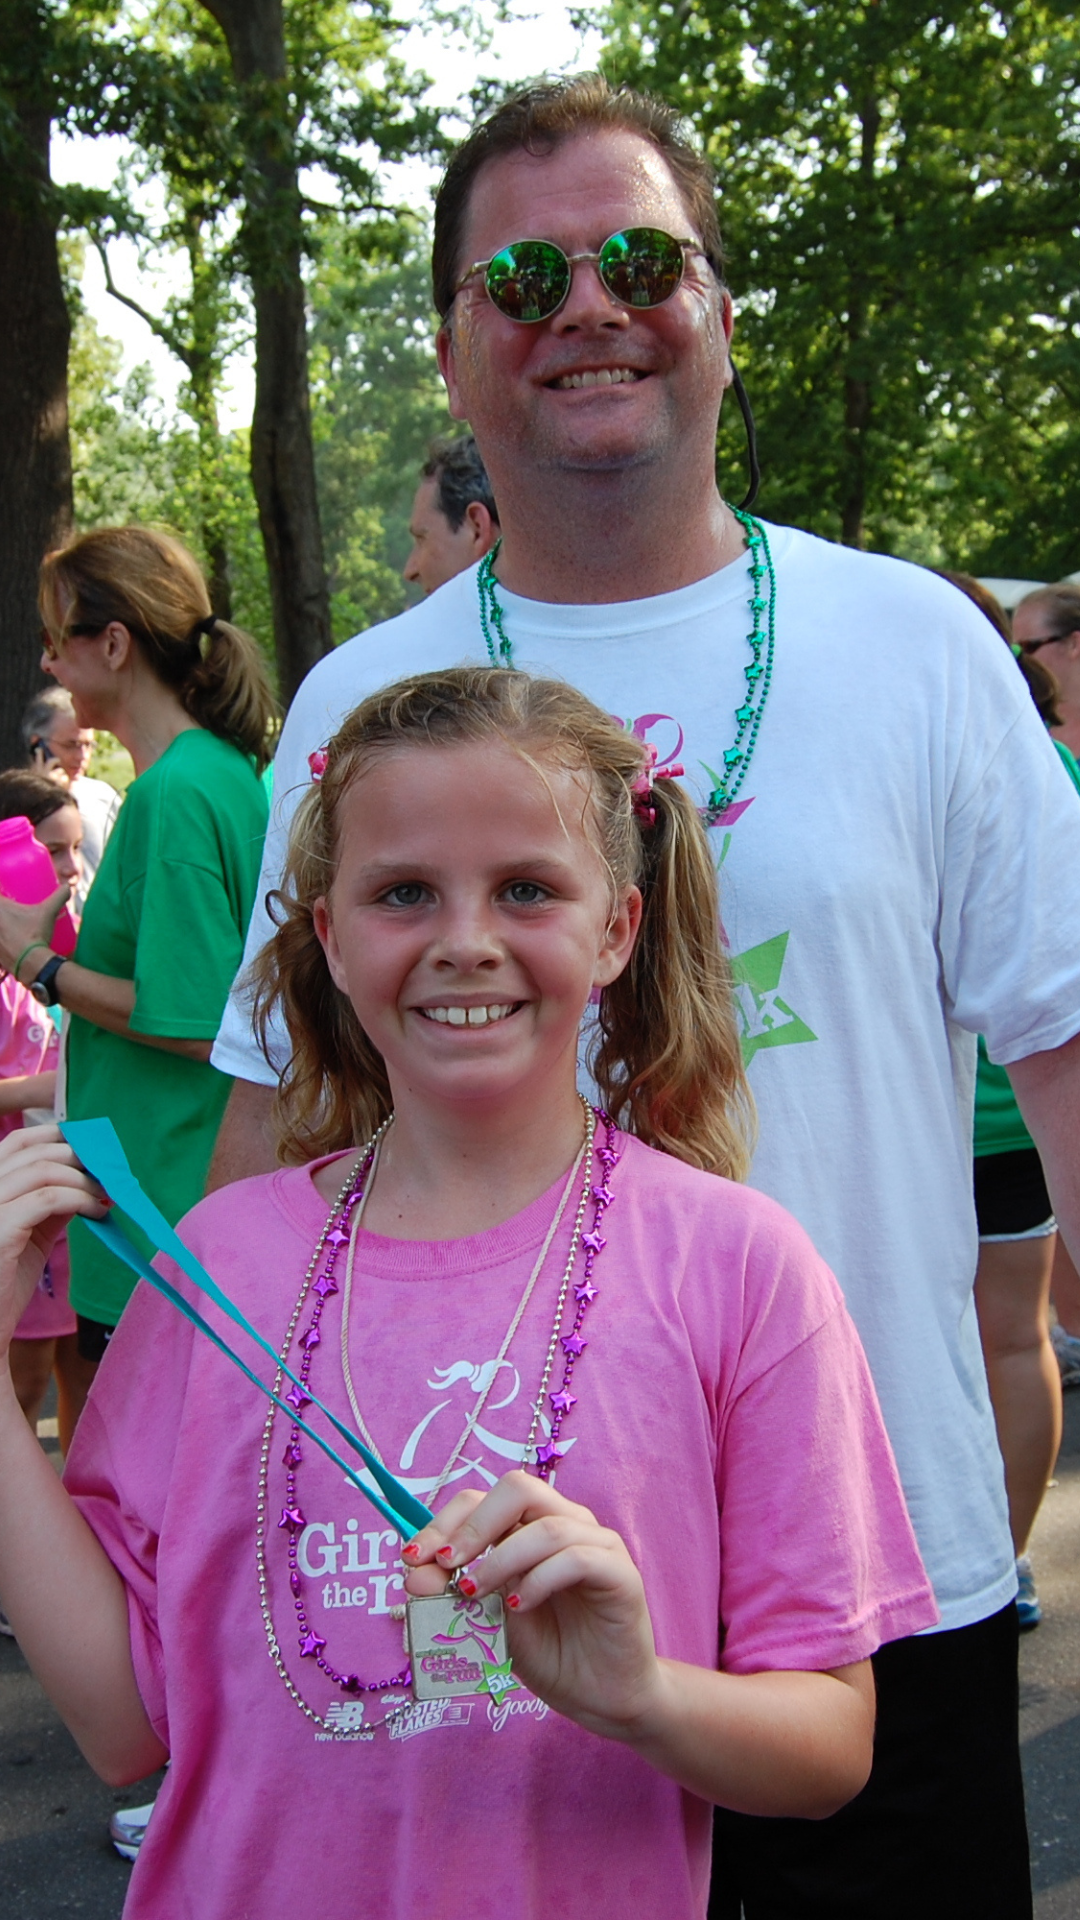 GOTR Dad at 5K with daughter wearing a GOTR shirt